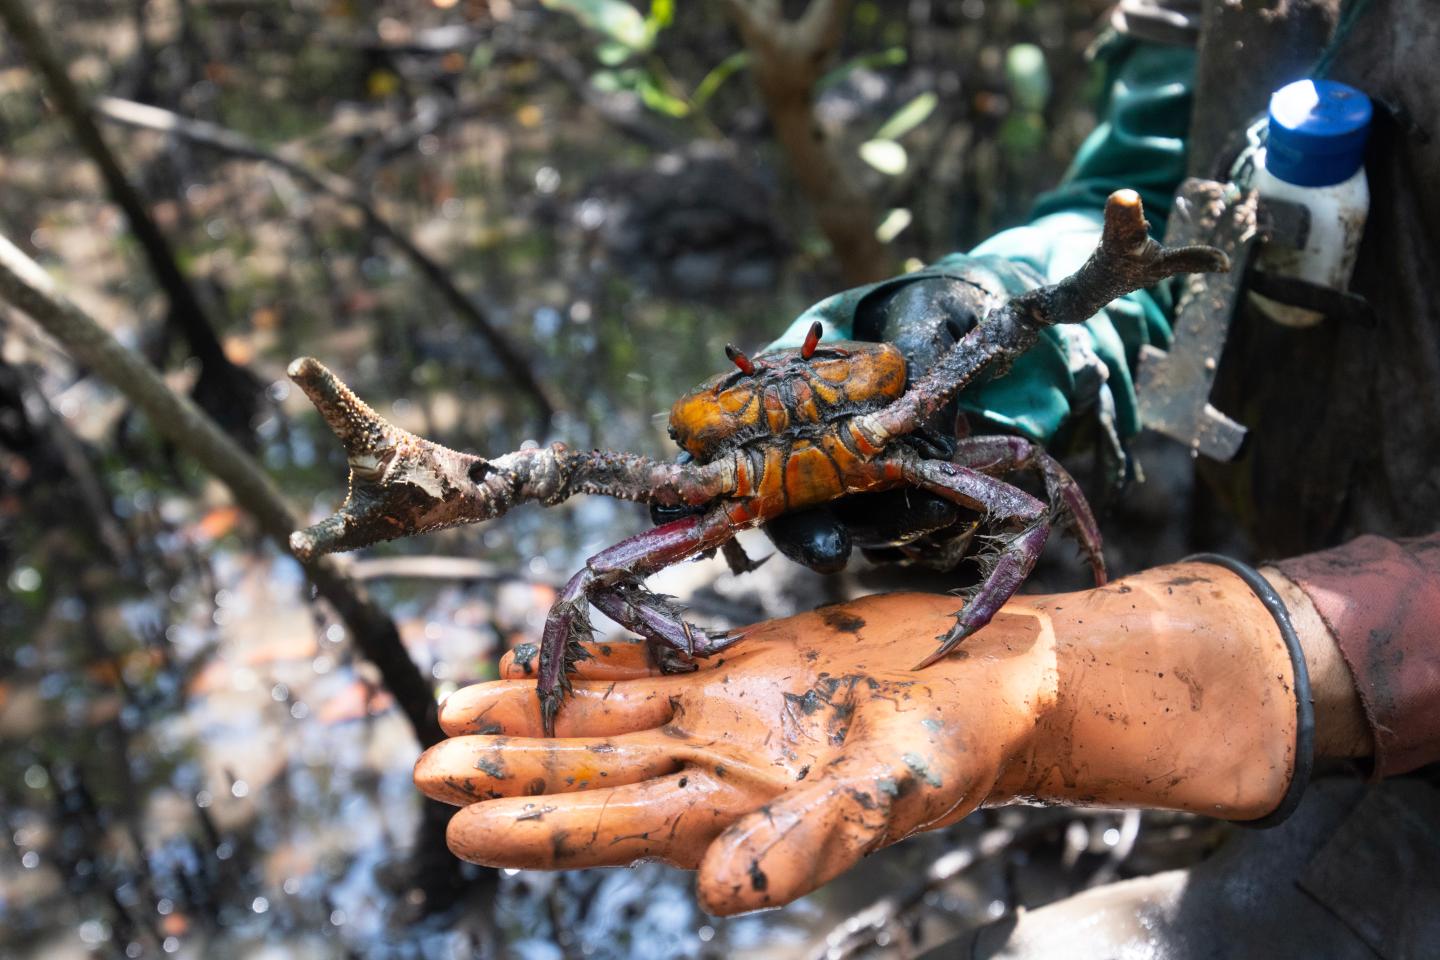 A red crab held in a gloved hand shortly after it was pulled from the mud